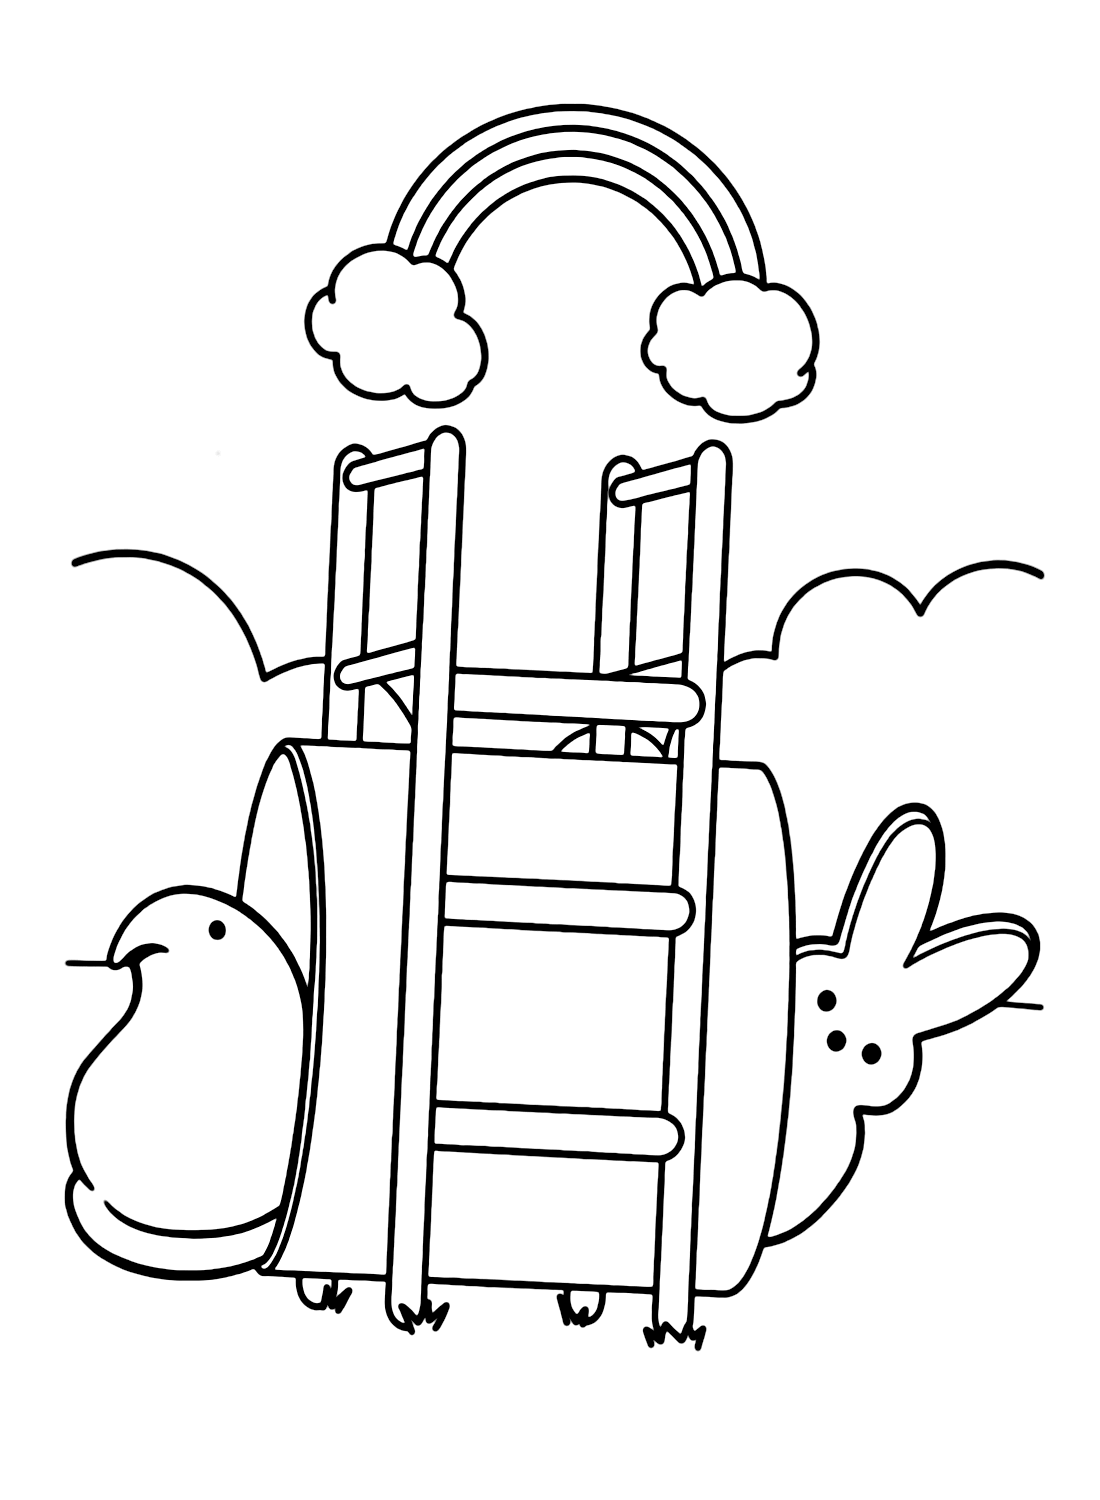 Fun Bunny and Chick Peeps Coloring Pages